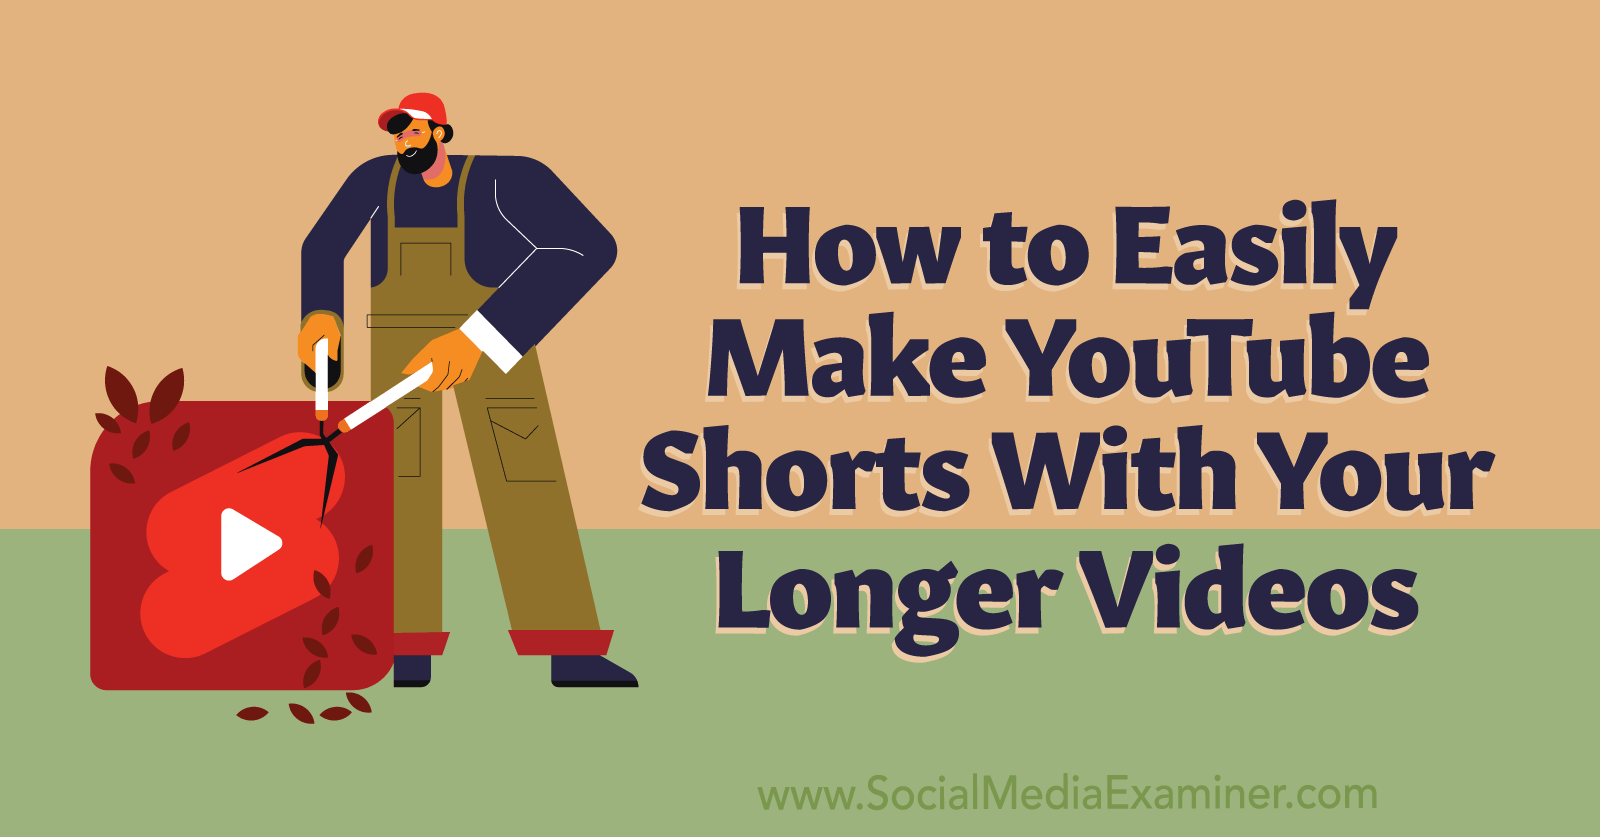 How To Easily Make Youtube Shorts With Your Longer Videos Social